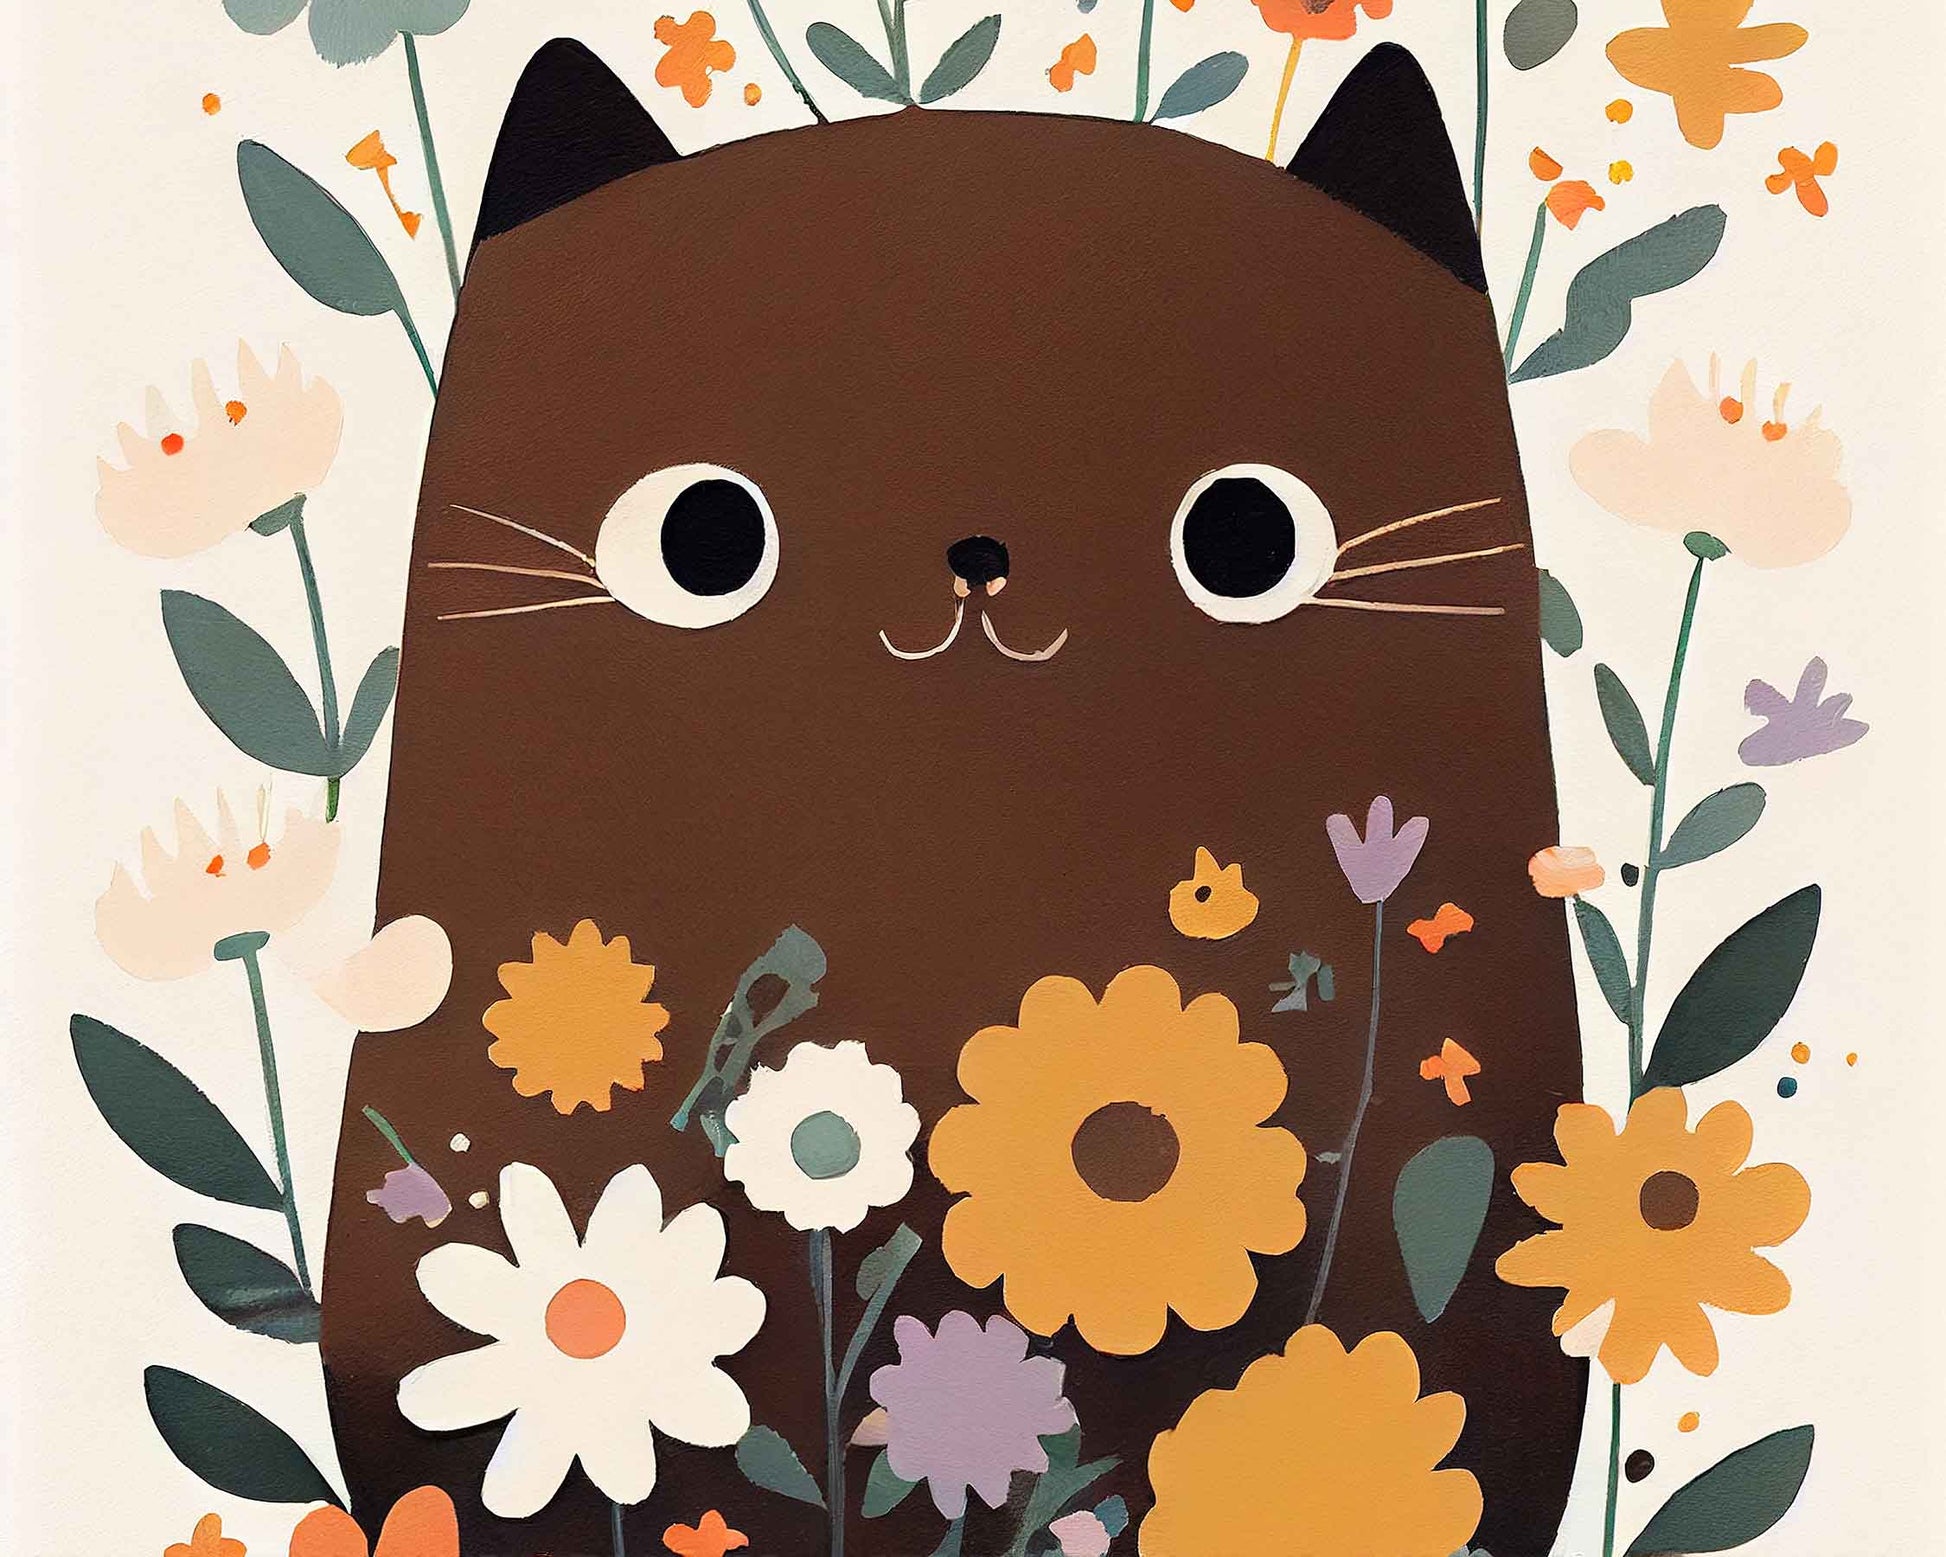 Framed Image of Cute Brown Cat Hiding in Flowers Wall Art Poster Print